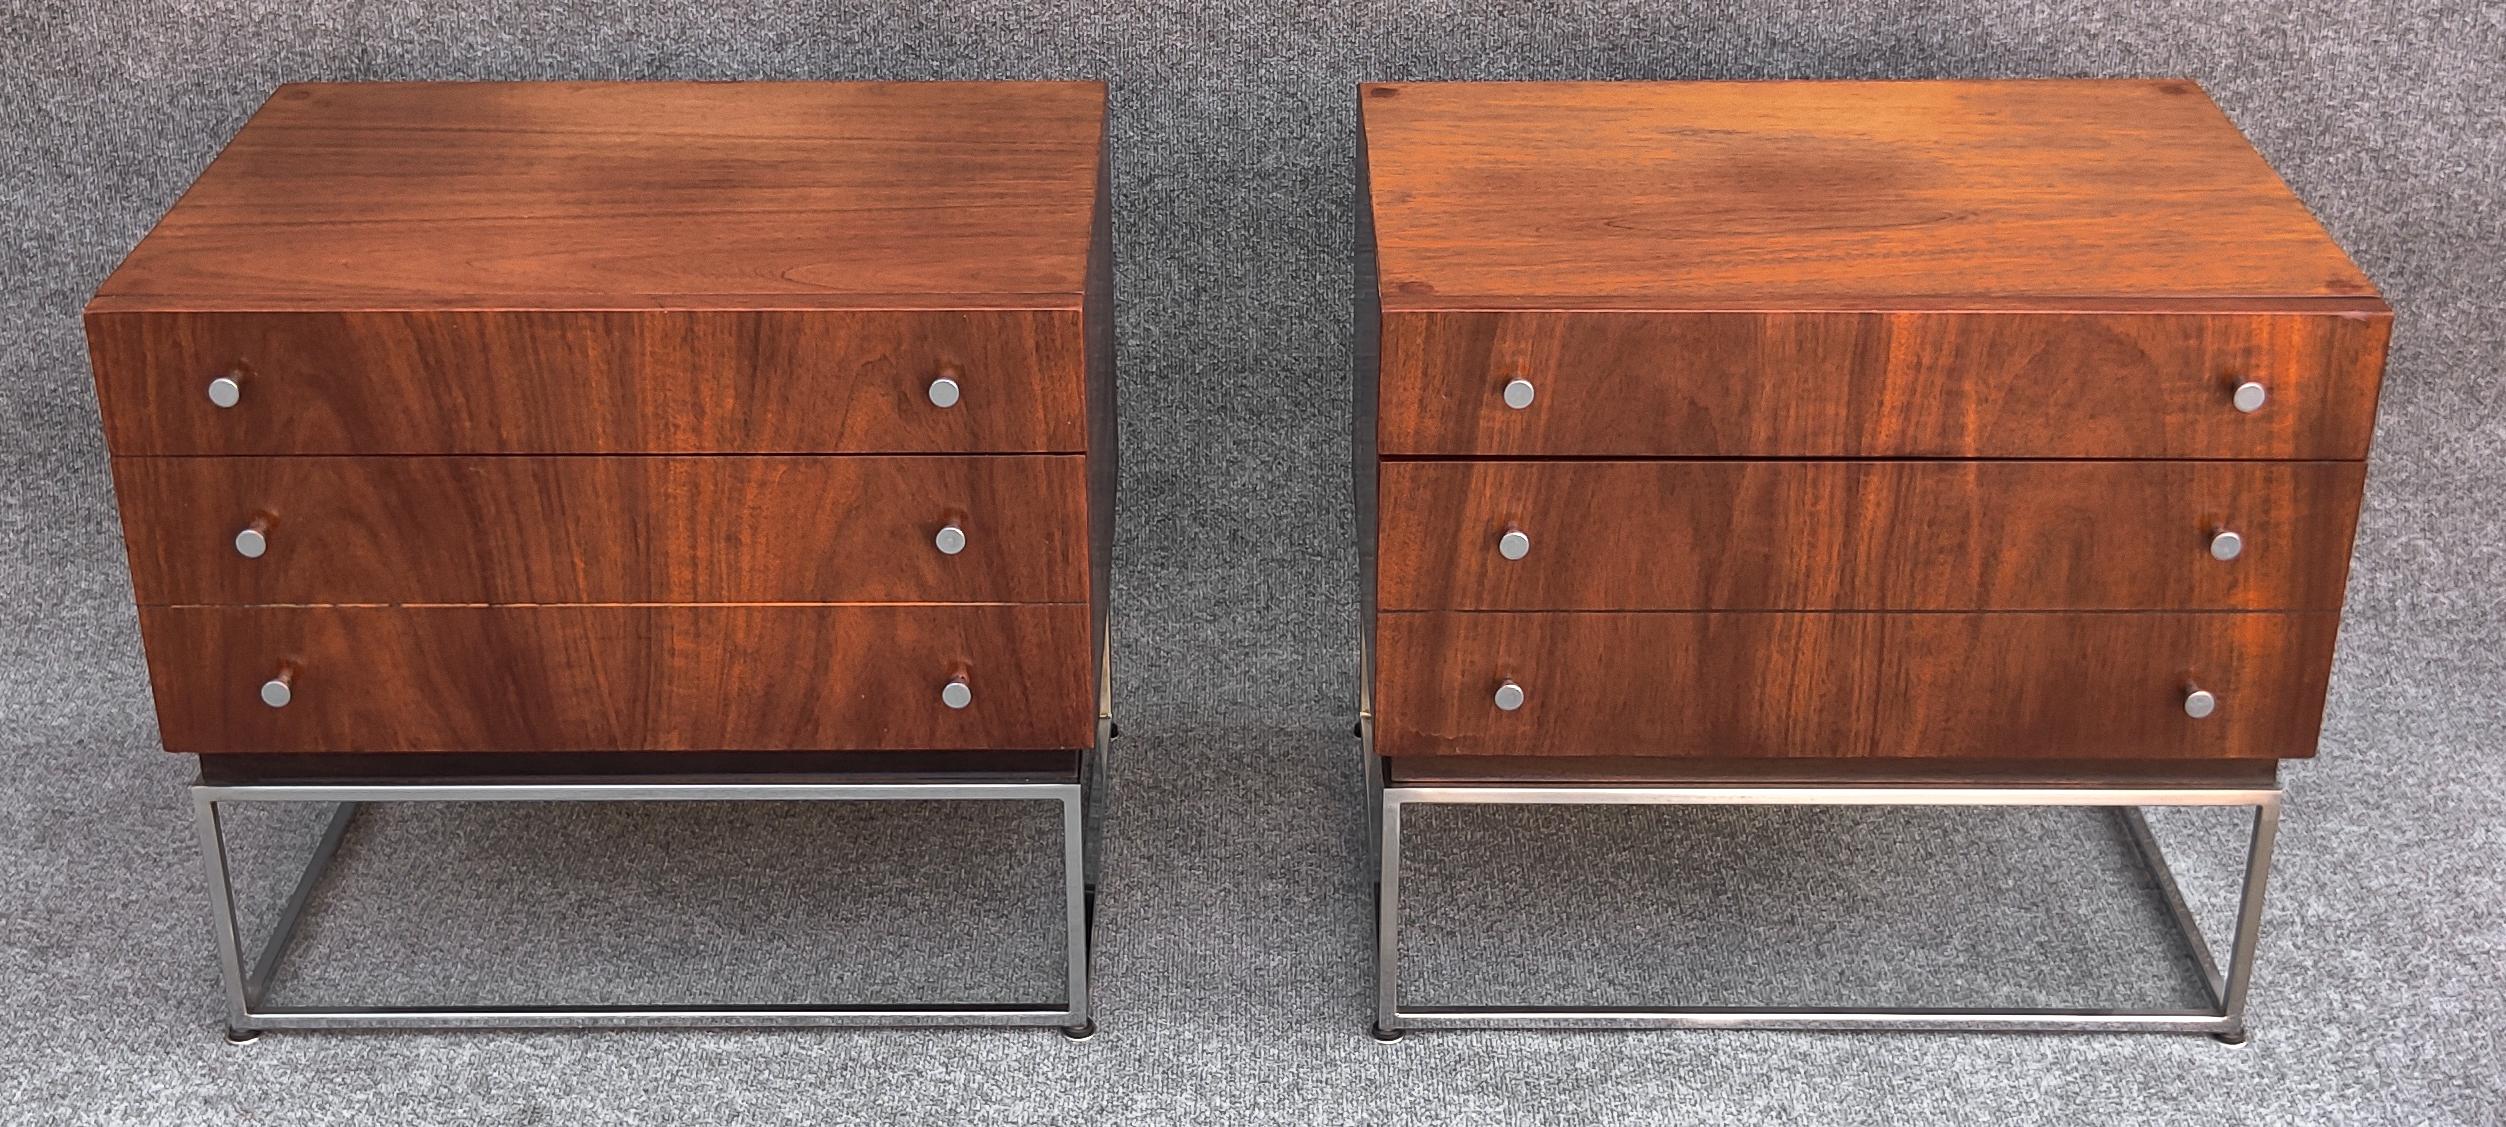 This handsome pair of nightstands or end tables was designed by Merton Gershun for American of Martinsville in the late 1960s. Made of beautifully grained walnut, these two-drawered nightstands have pleasing proportions, especially when paired with